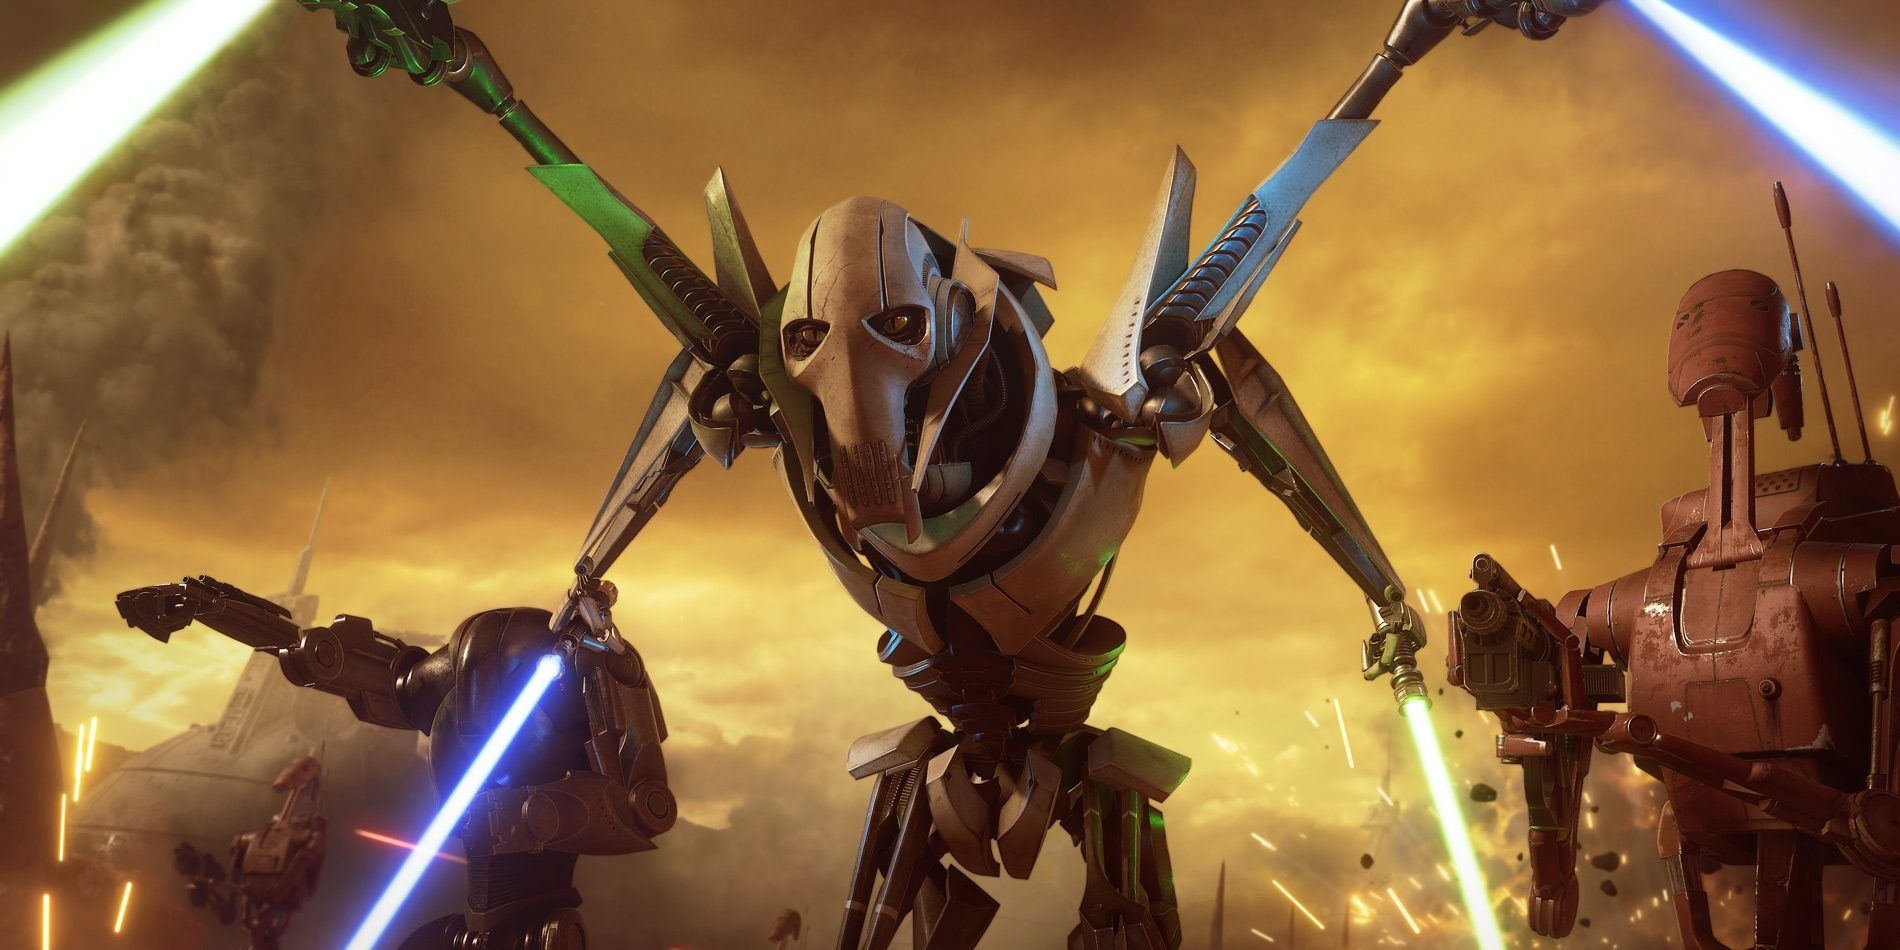 General Grievous and his droid army in Star Wars Battlefront II